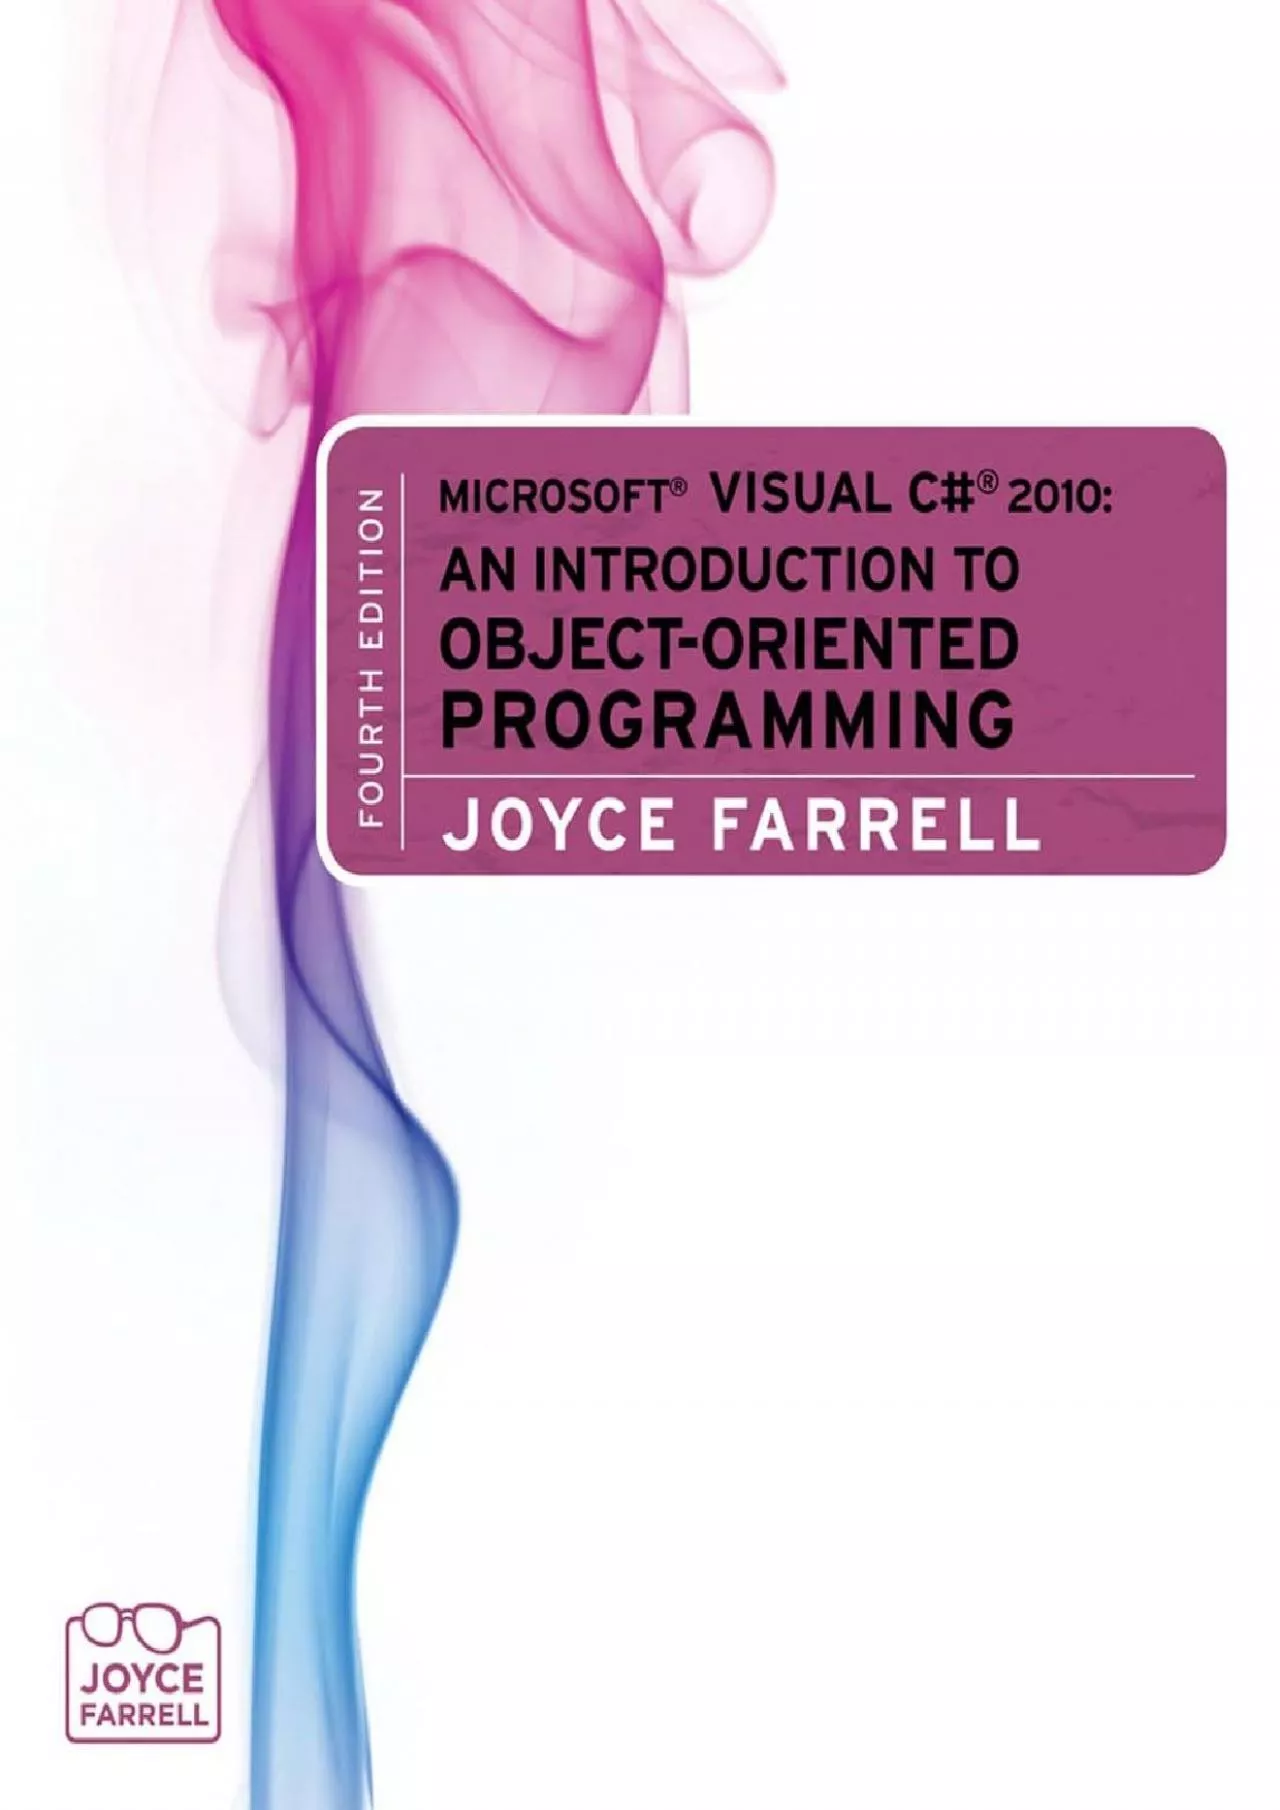 [FREE]-Microsoft Visual C 2010: An Introduction to Object-Oriented Programming (Introduction